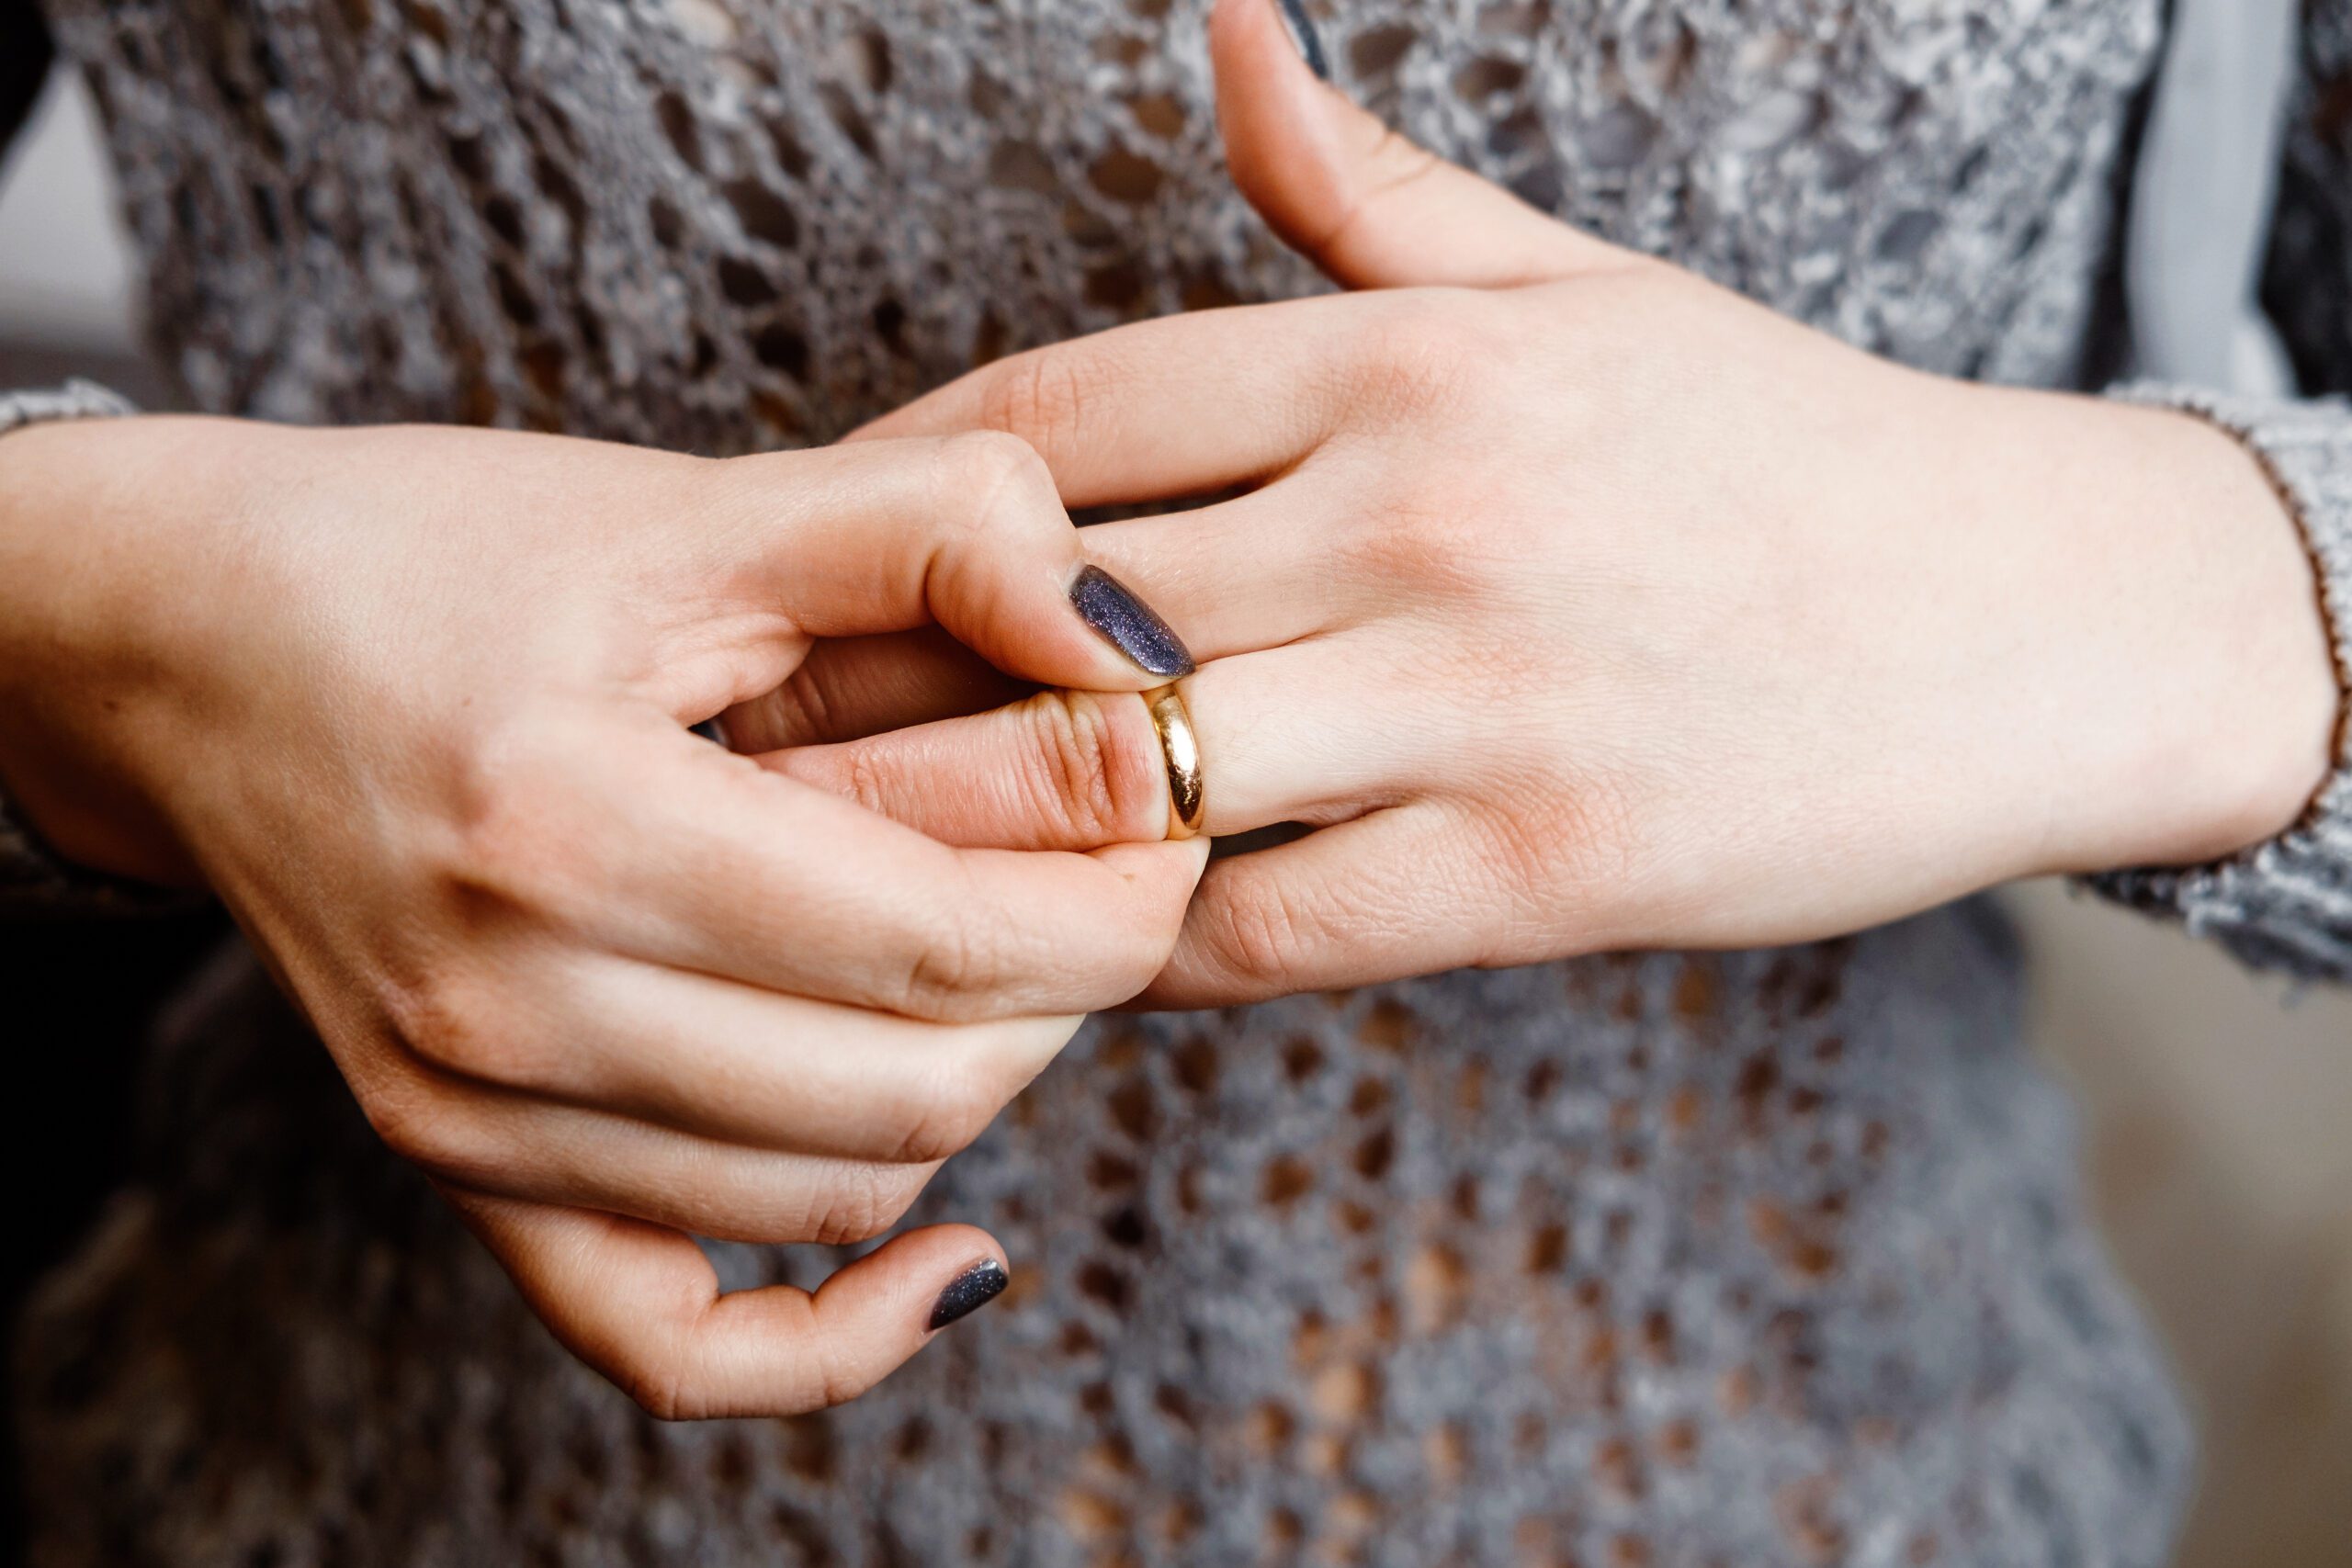 woman takes off an engagement ring, family conflict, close-up